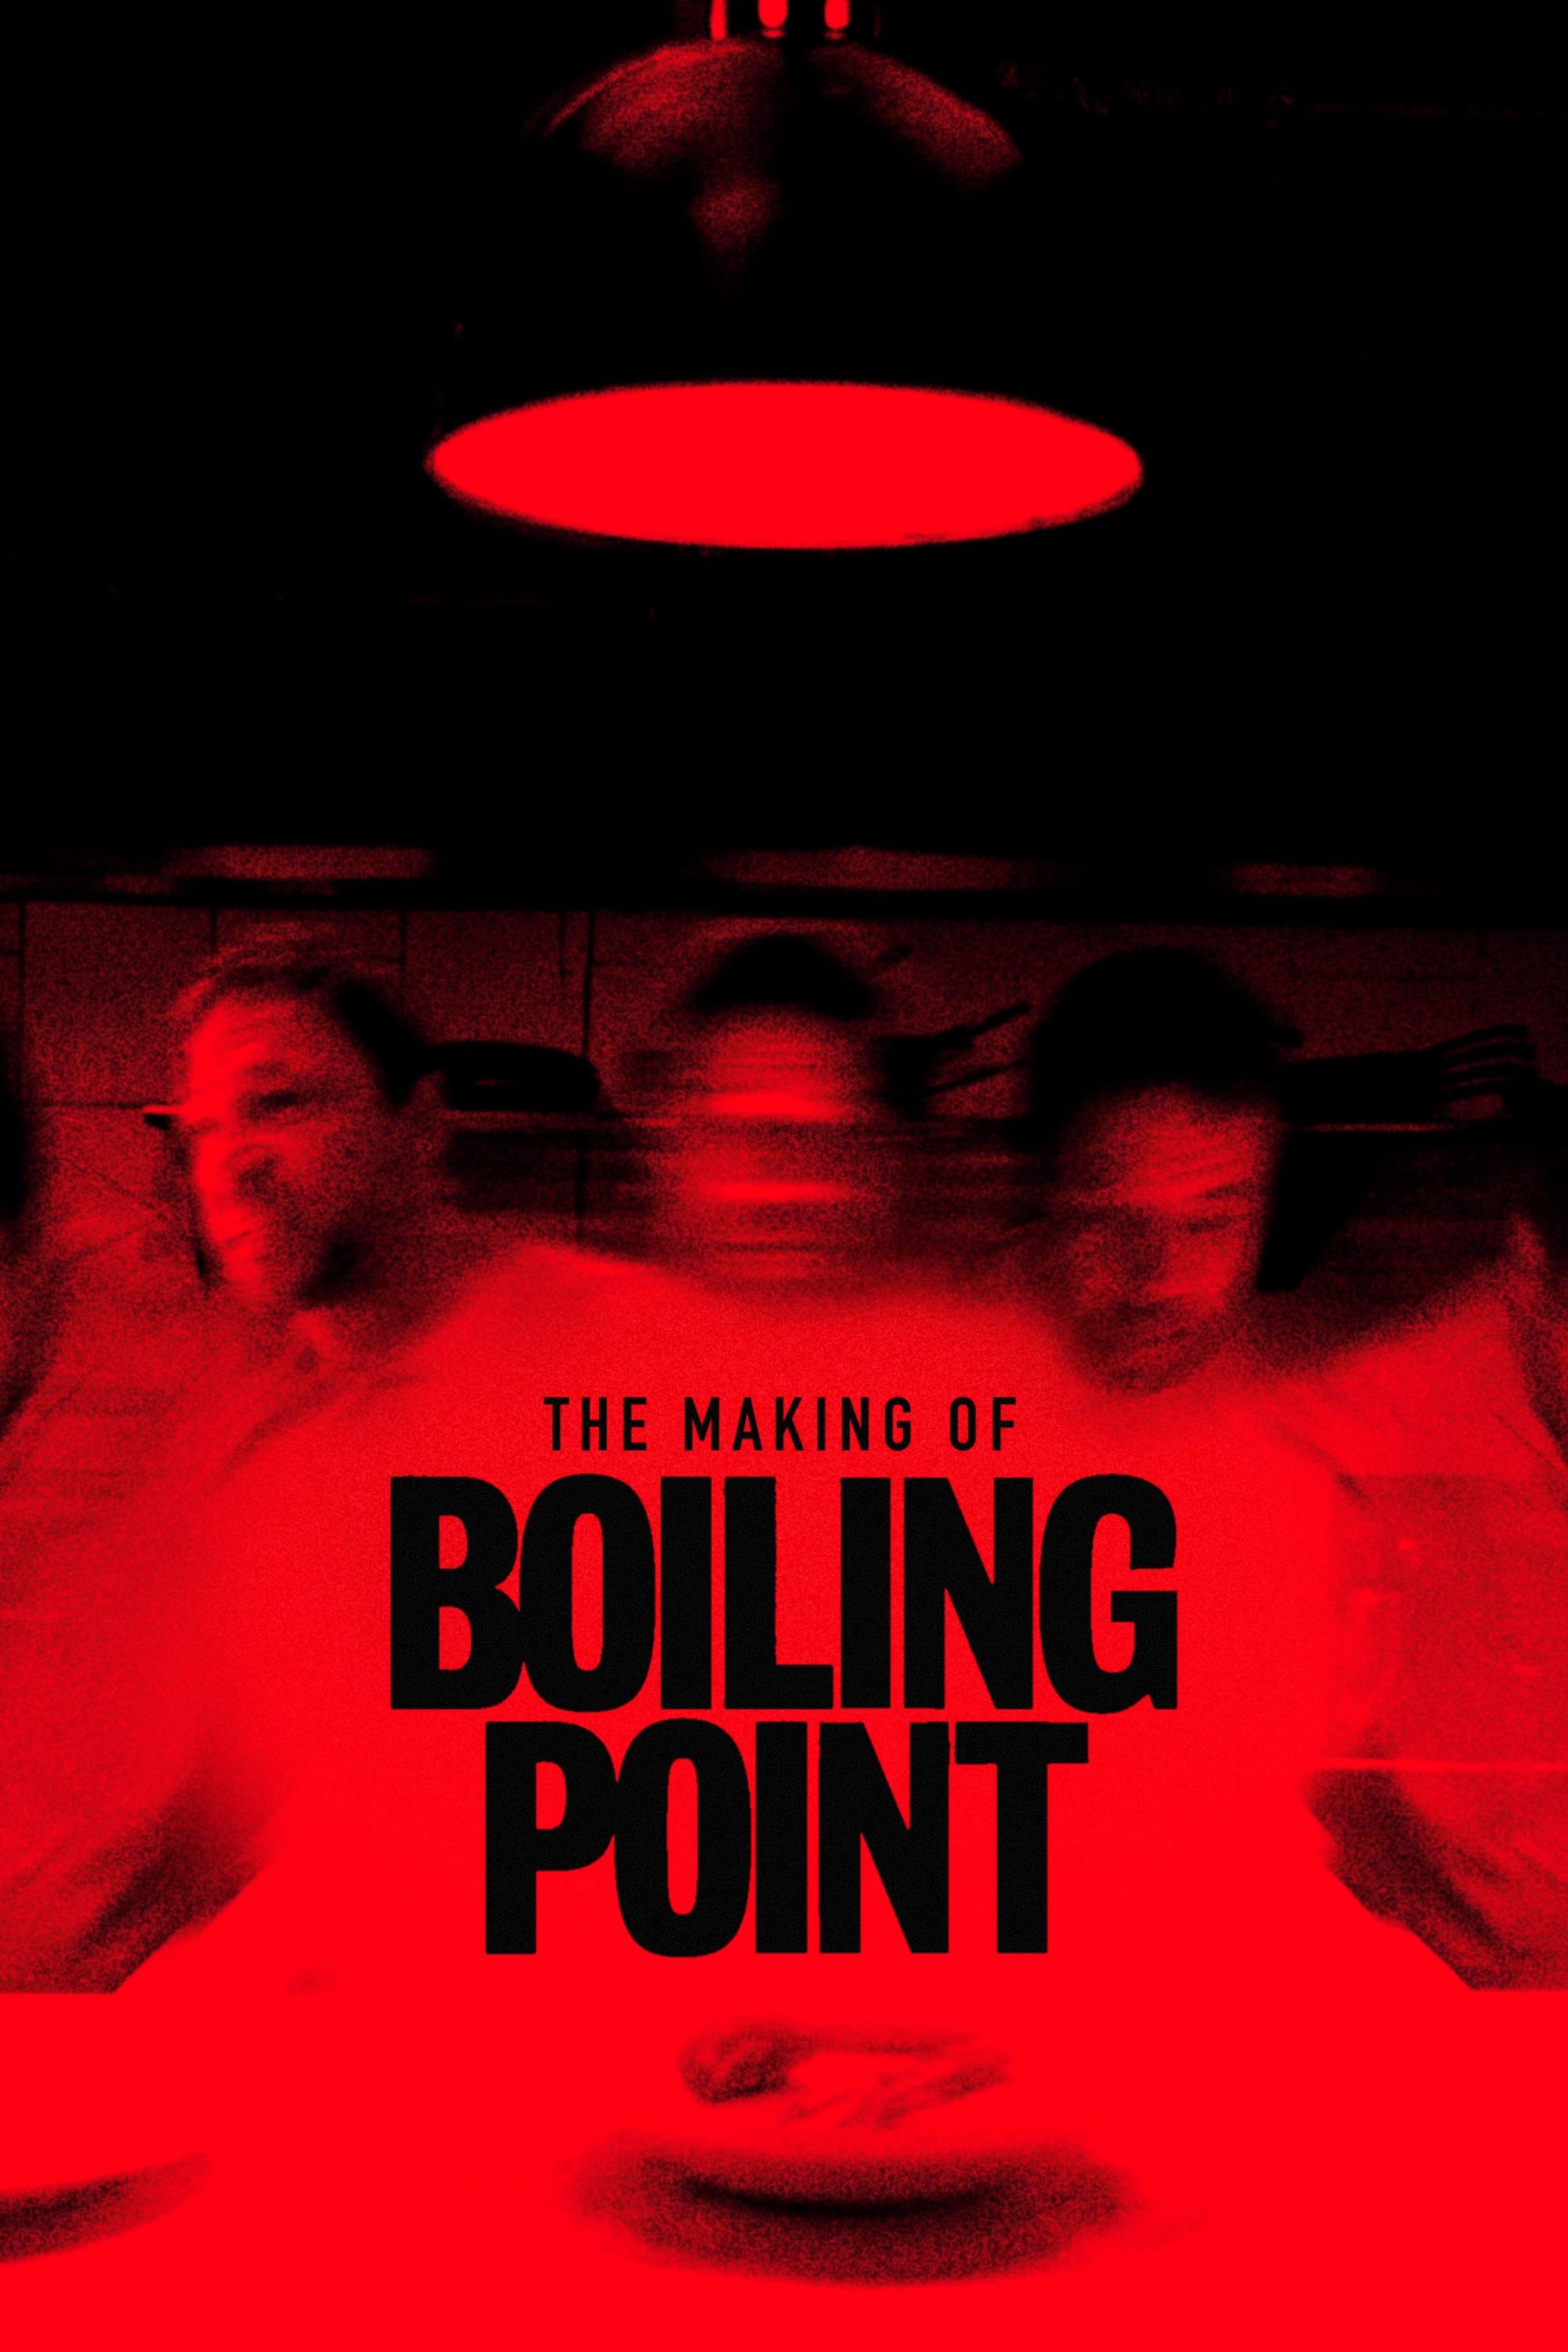 The Making of Boiling Point